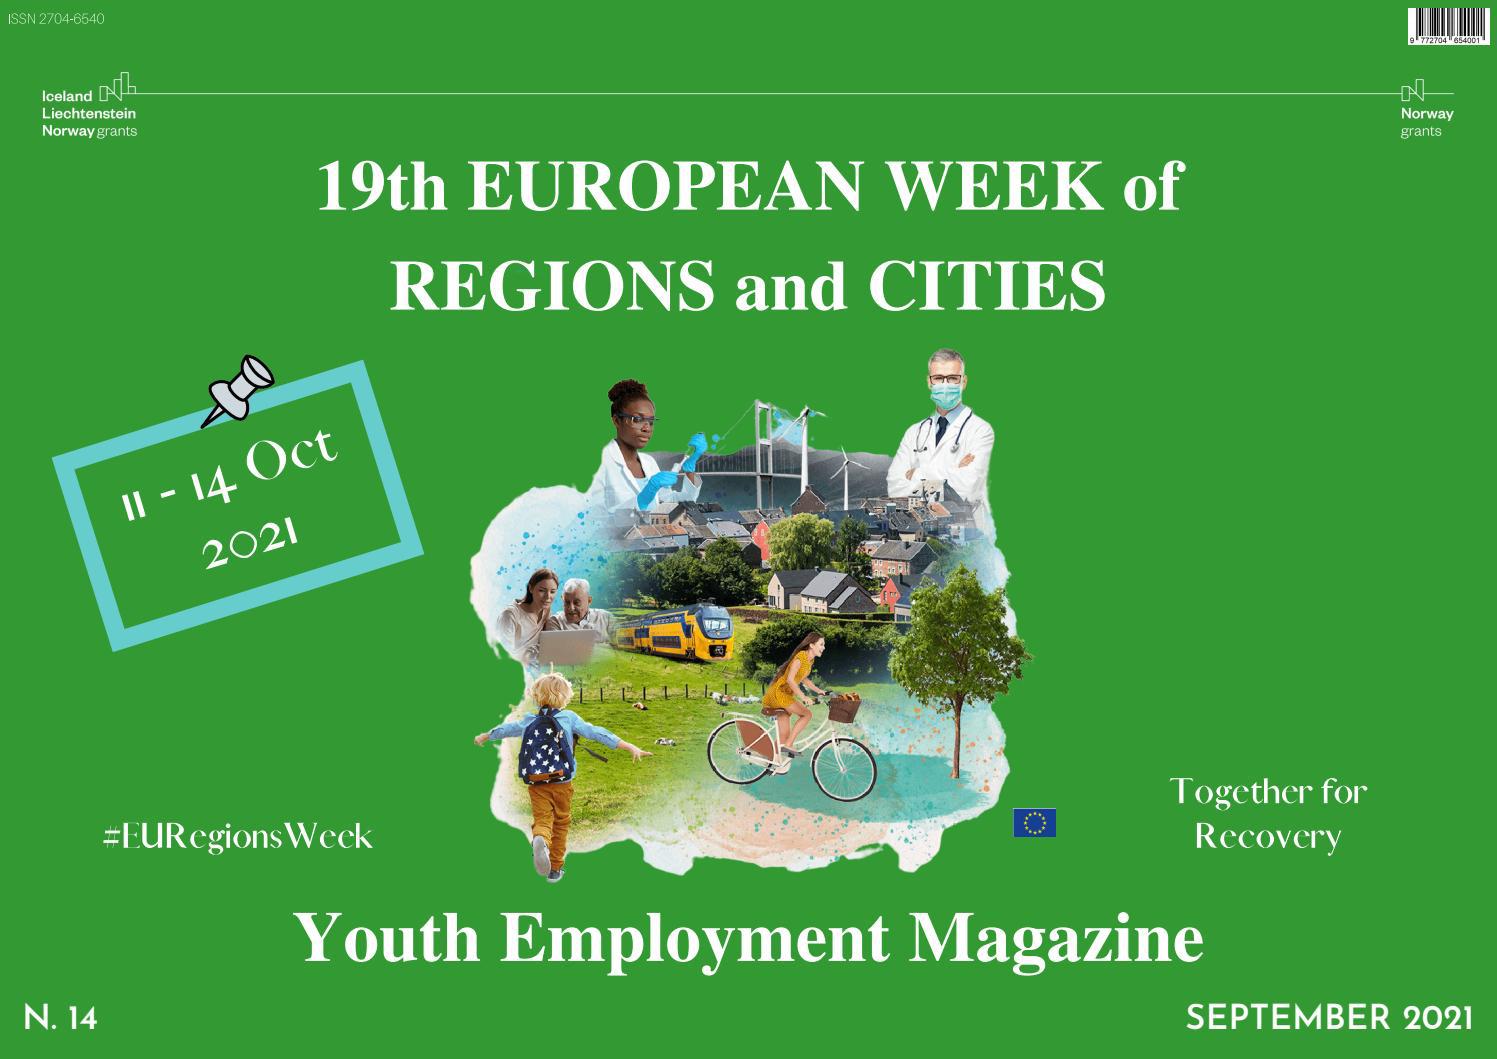 The Youth Employment Magazine - Issue 14